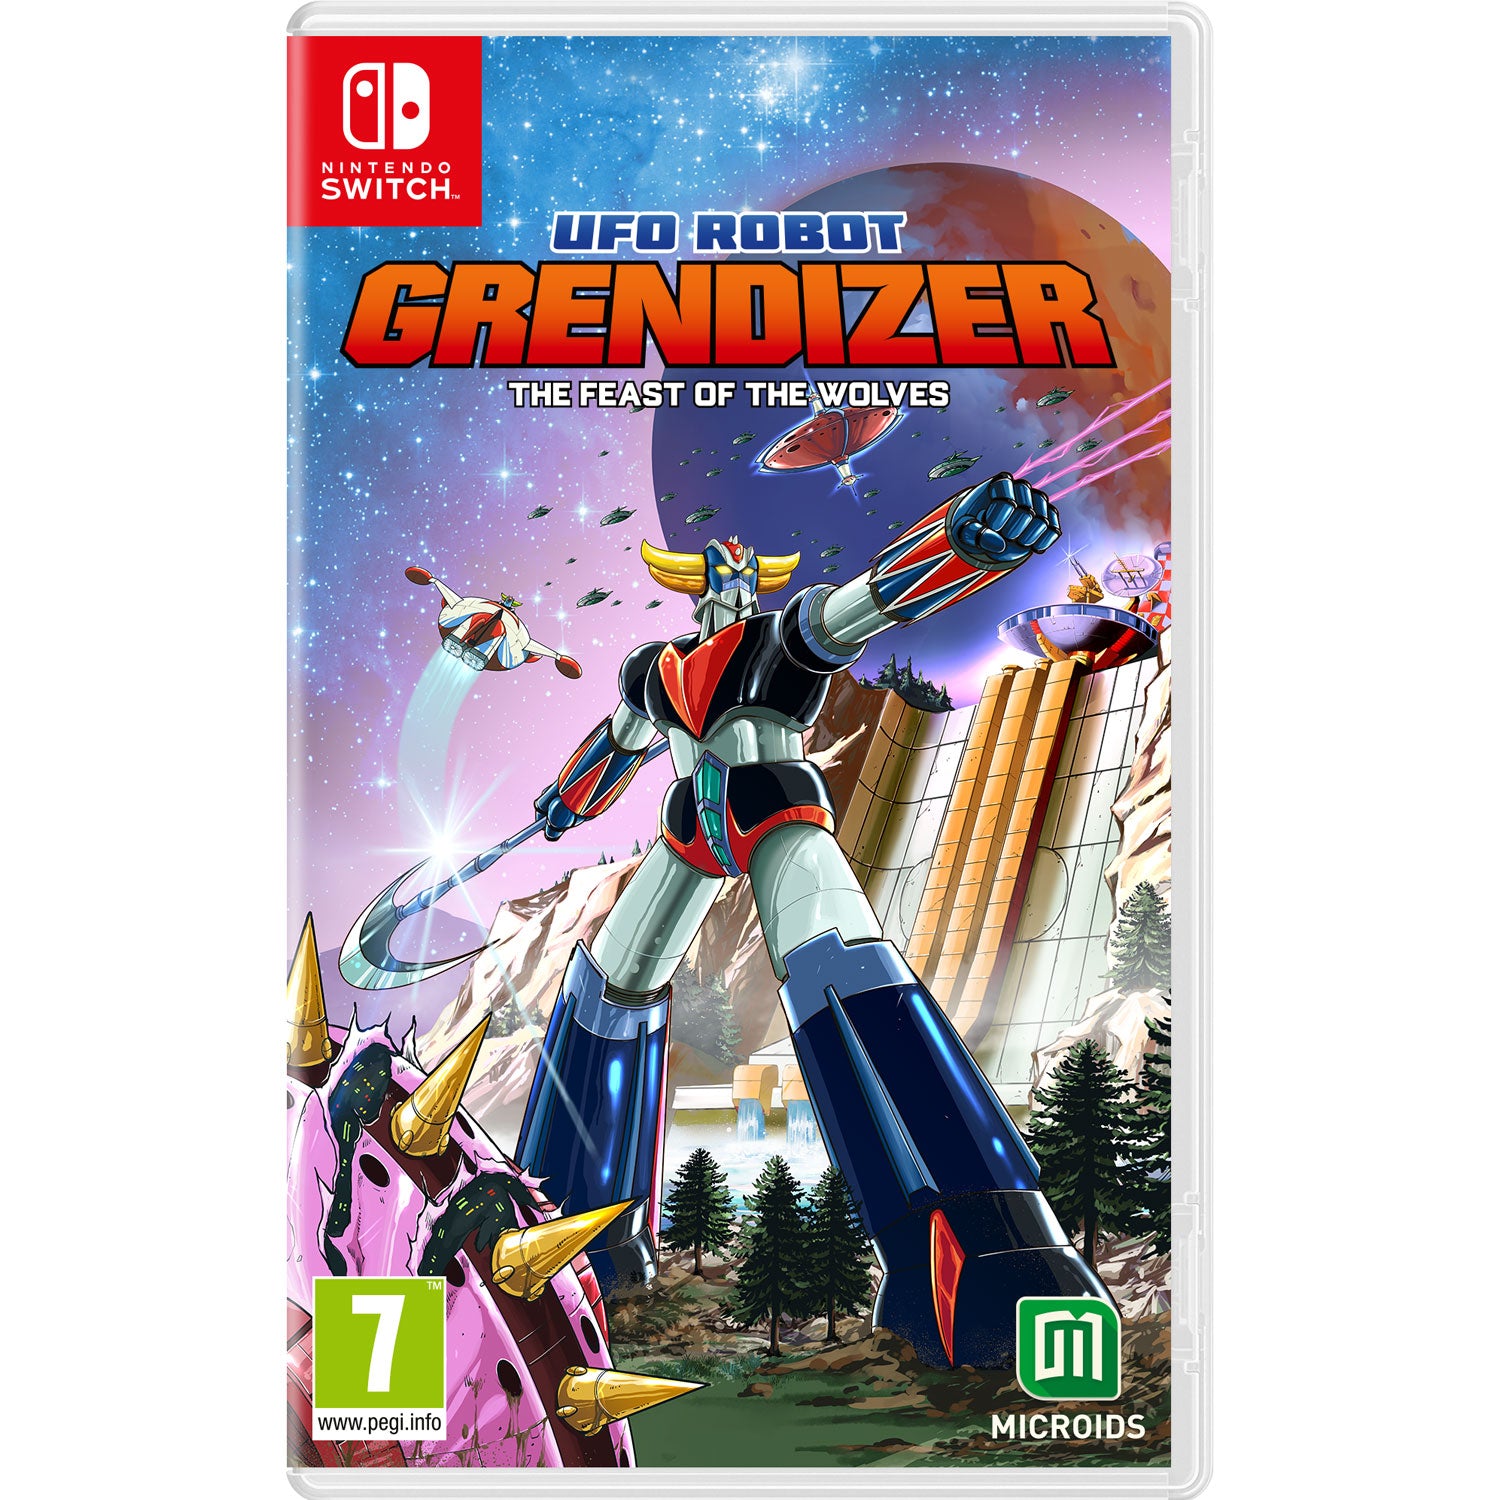 Nintendo Switch UFO Robot Grendizer: The Feast of the Wolves